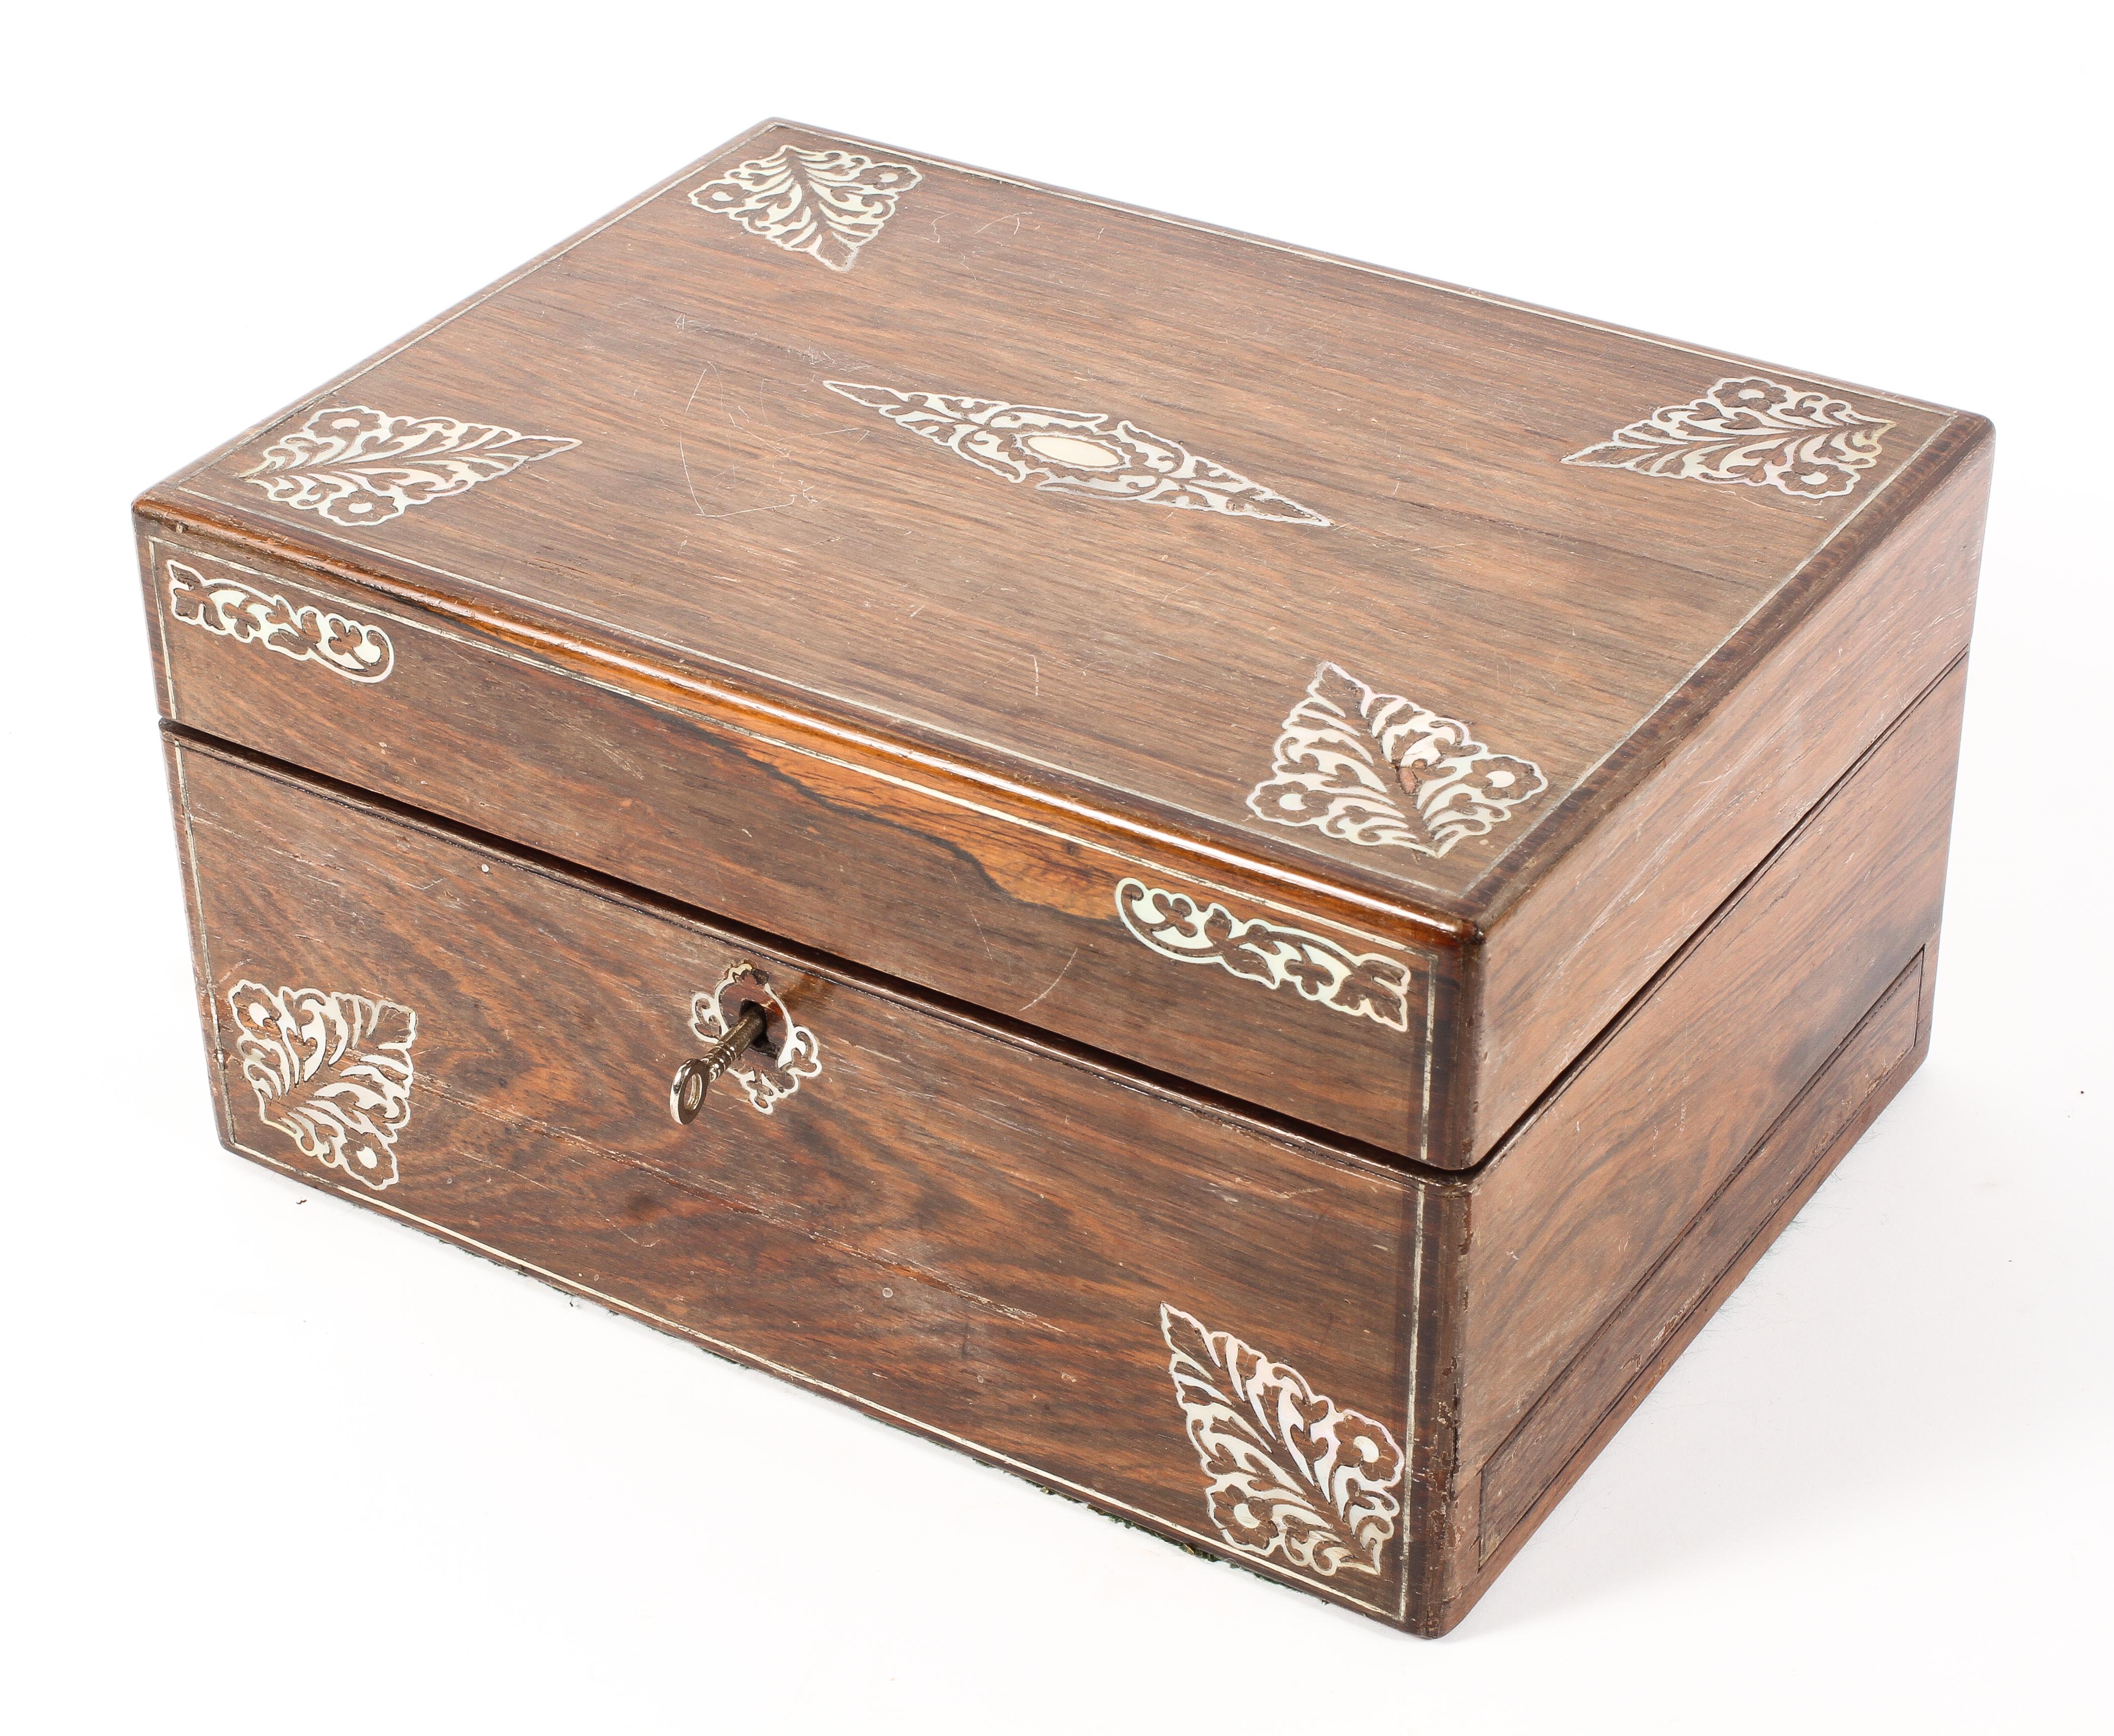 A 19th century rosewood and mother of pearl inlay ladies traveling vanity box with fitted red